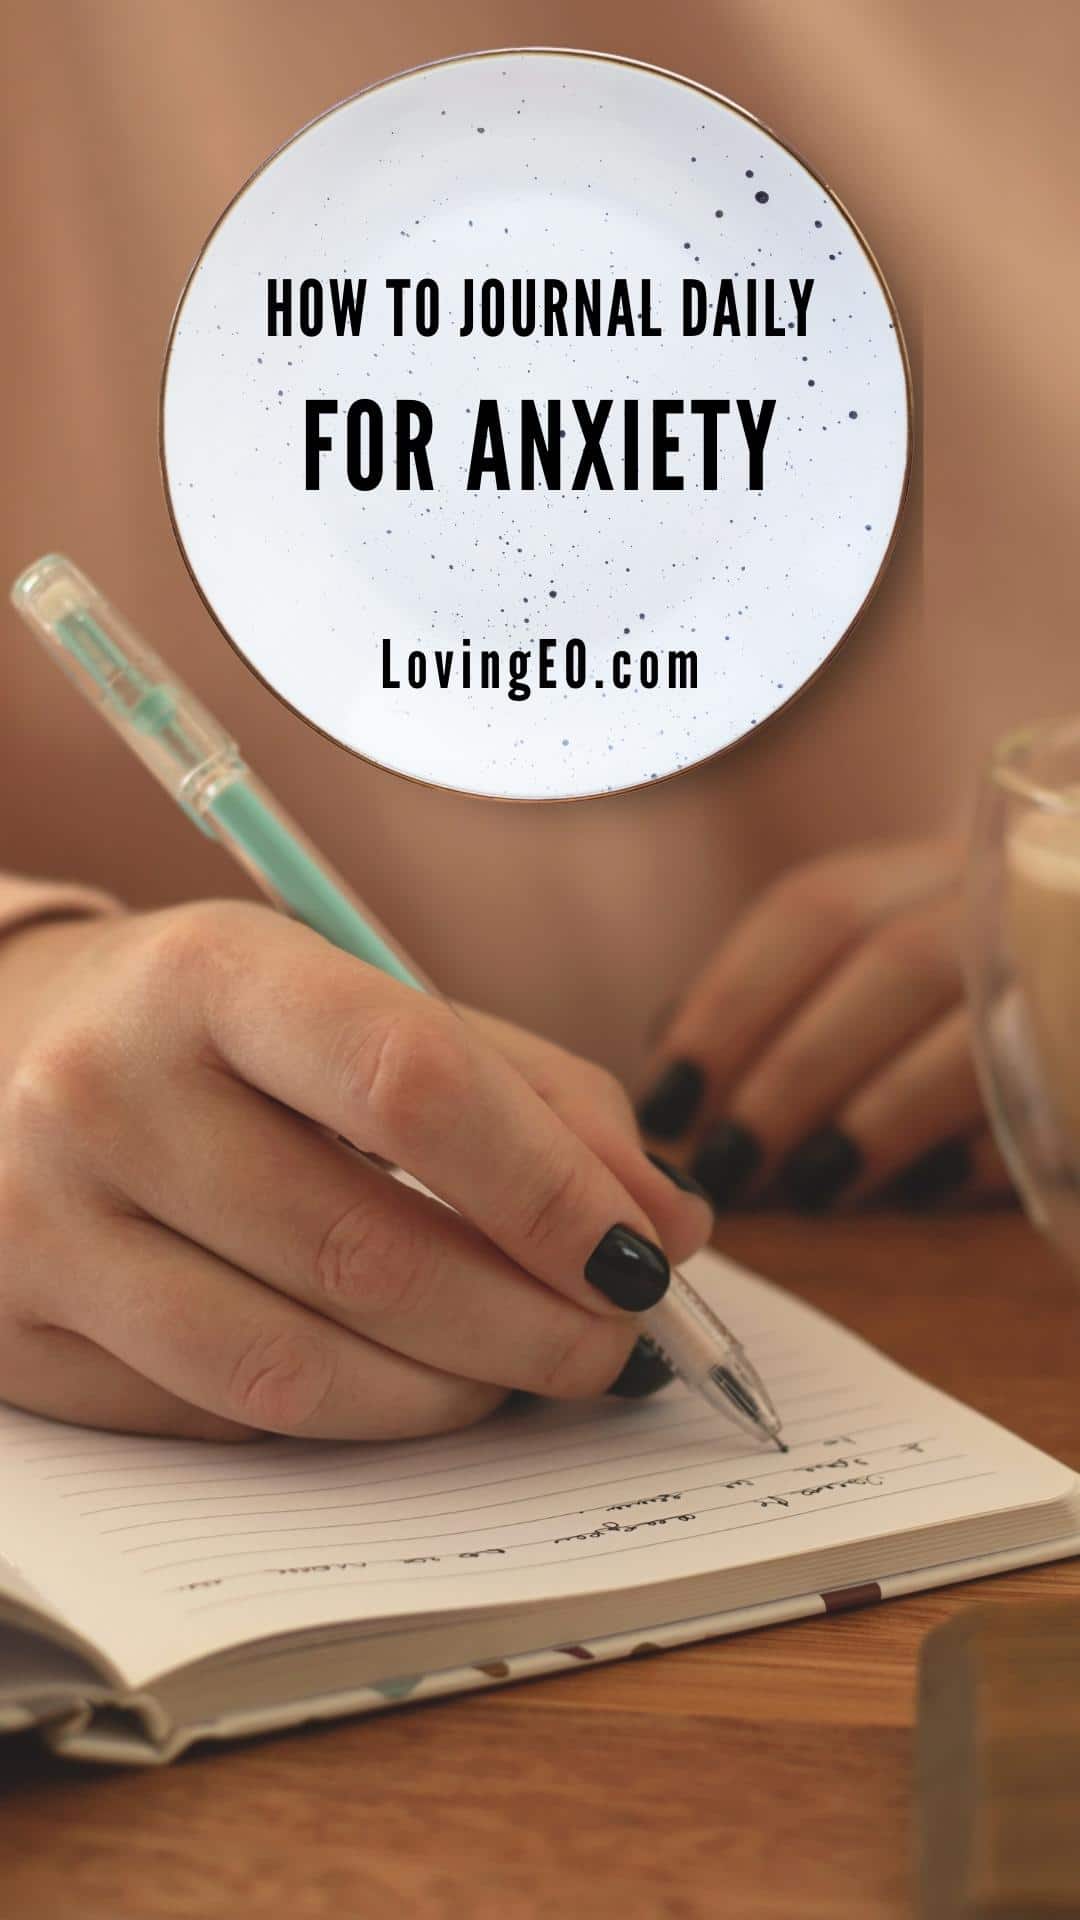 How To Journal Daily For Anxiety (2)